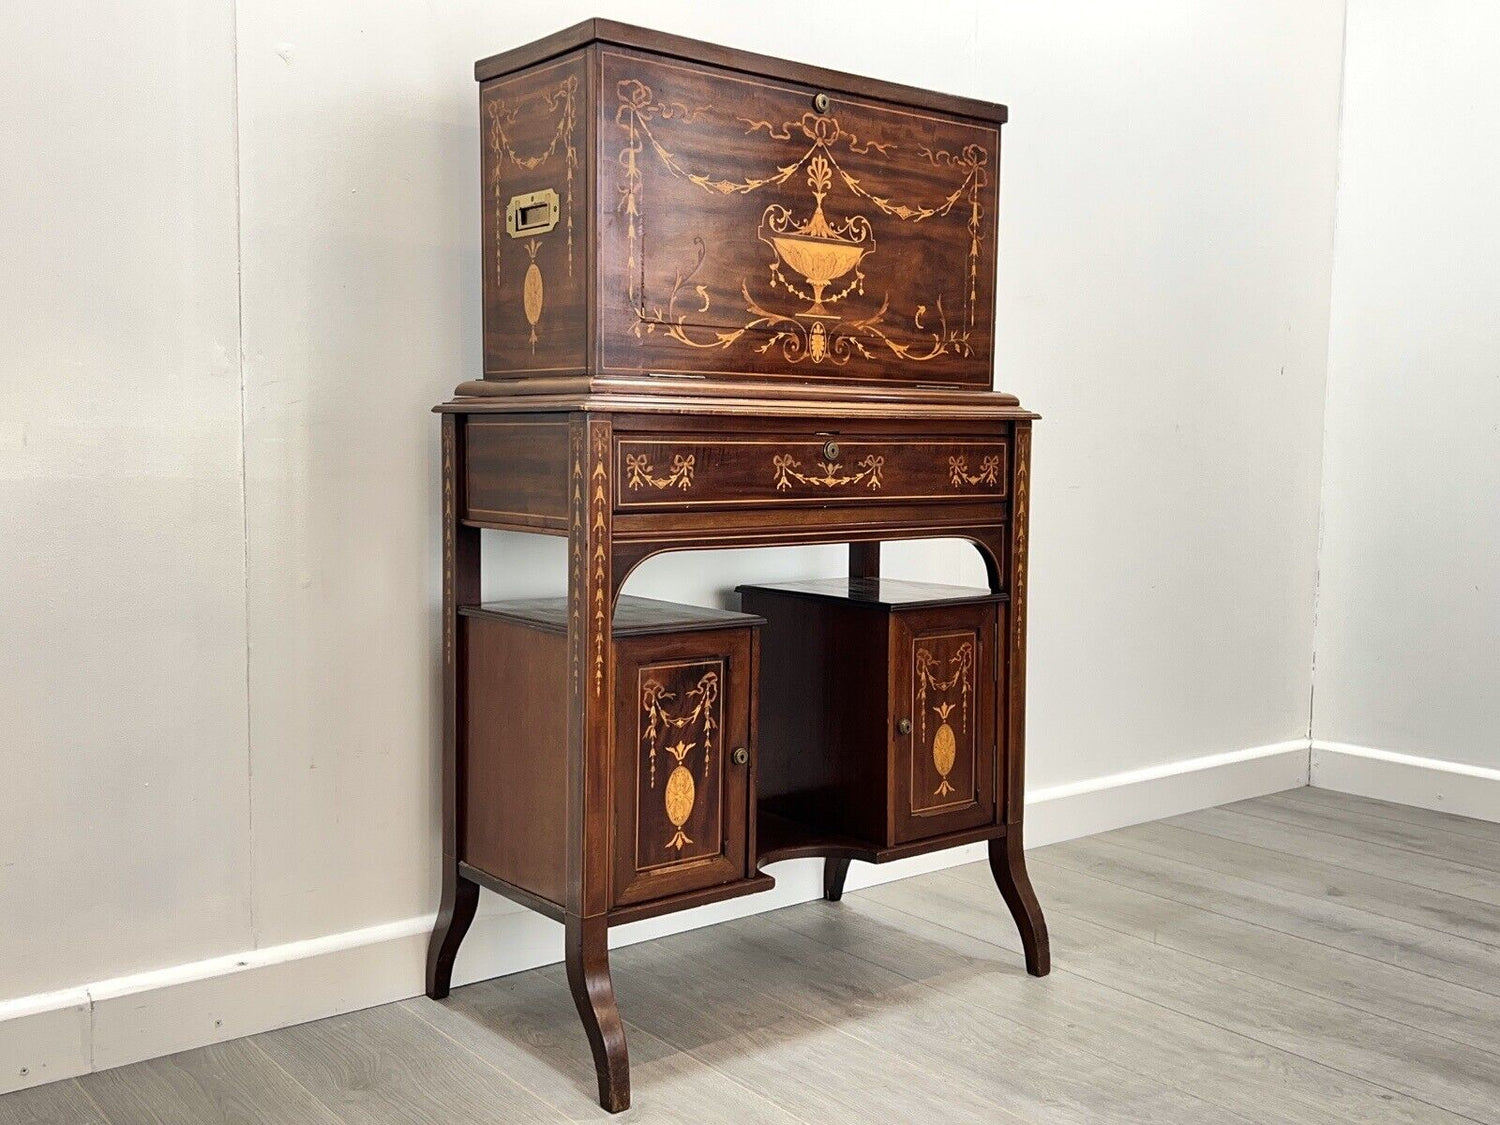 Edwardian, Campaign Style and Inlaid Travelling Writing Desk